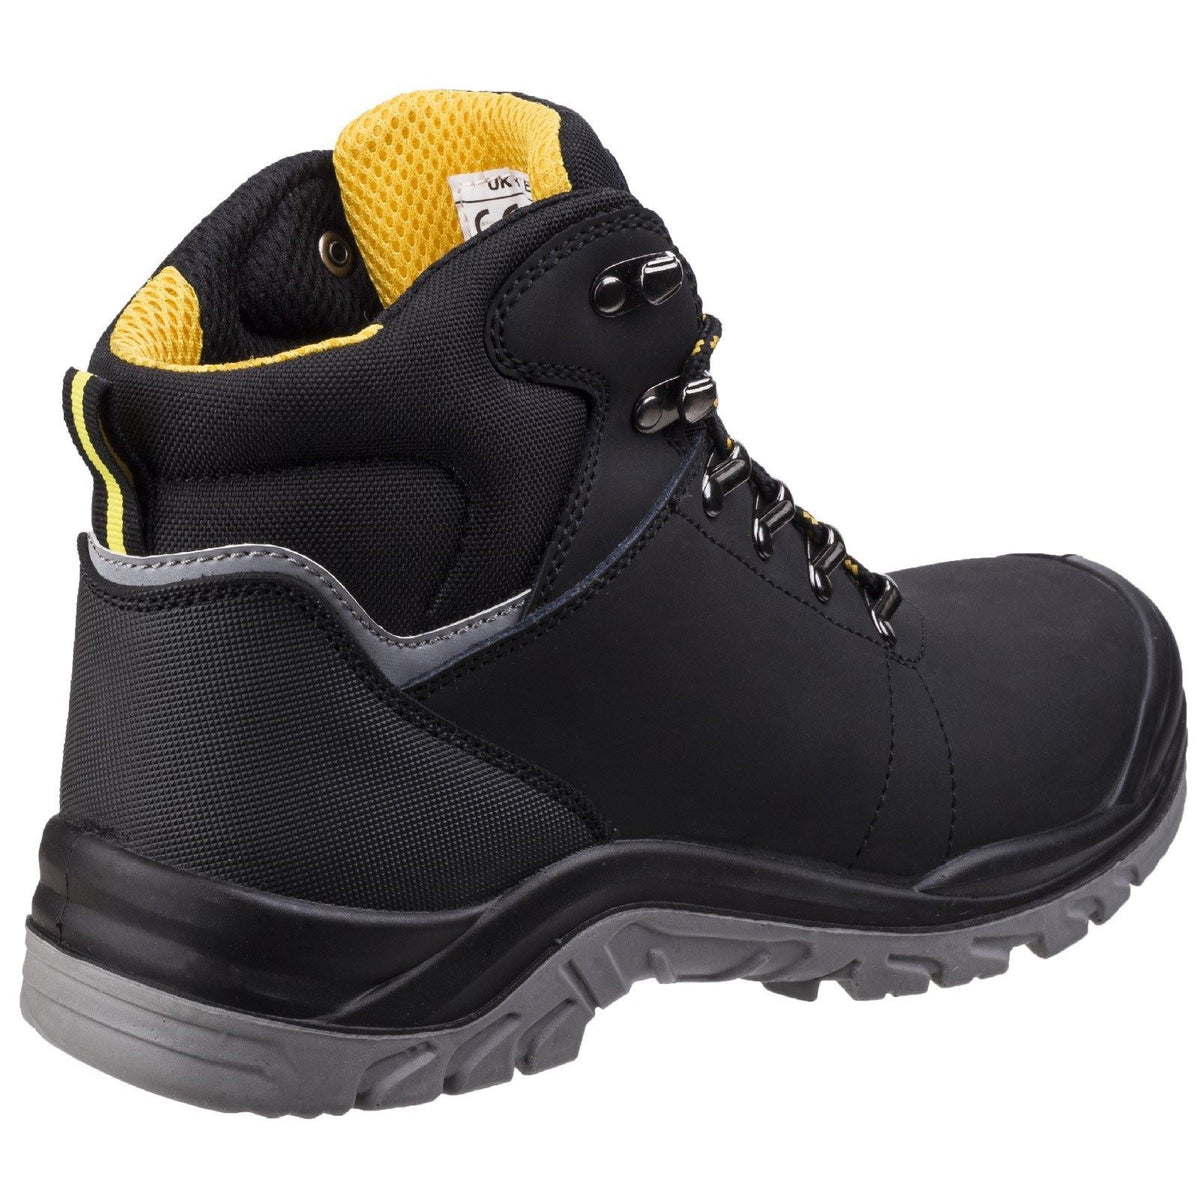 Amblers Safety AS252 Lightweight Water Resistant Leather Safety Boots